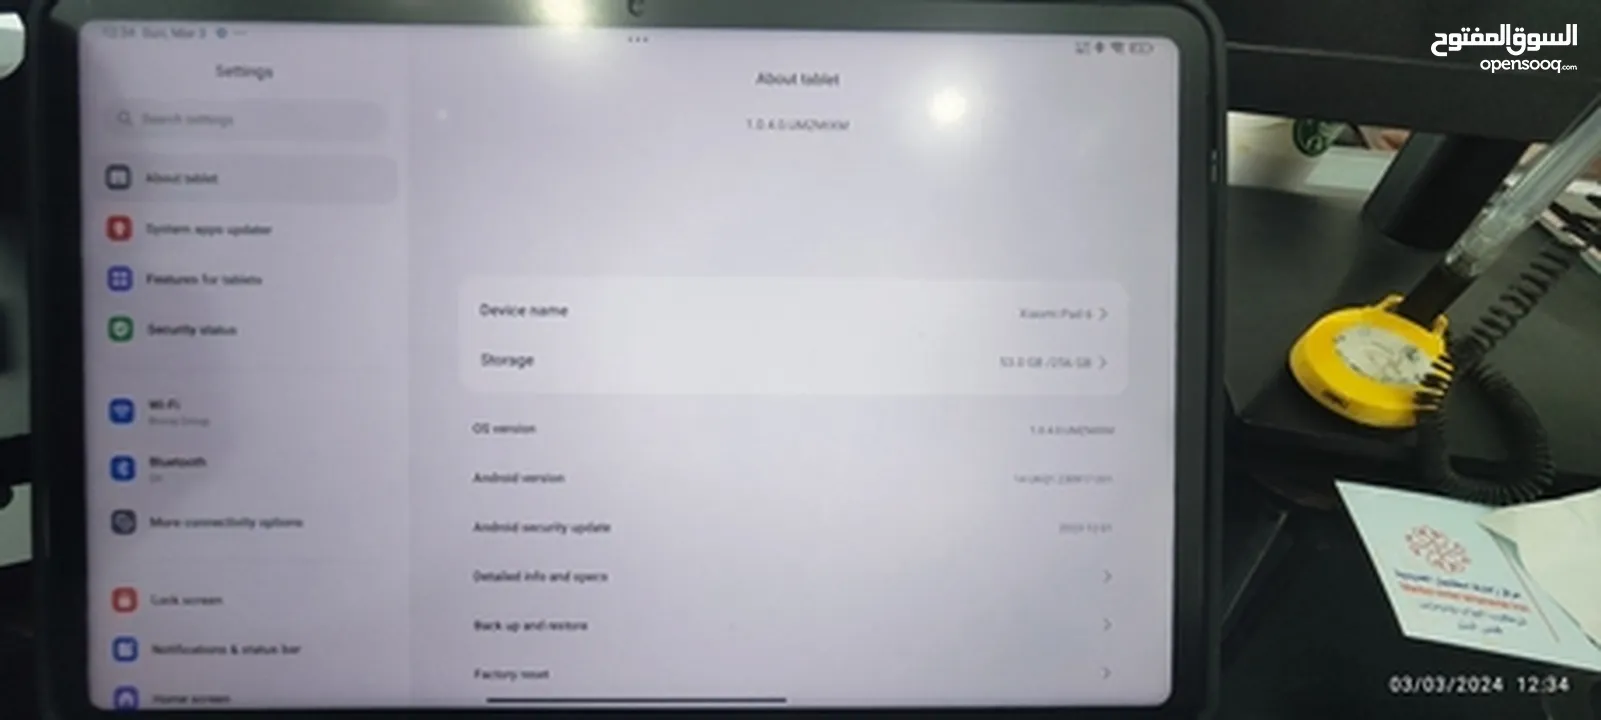 Xiaomi Pad 6 With Smart Pen And Keyboard ,-  3 Months Old